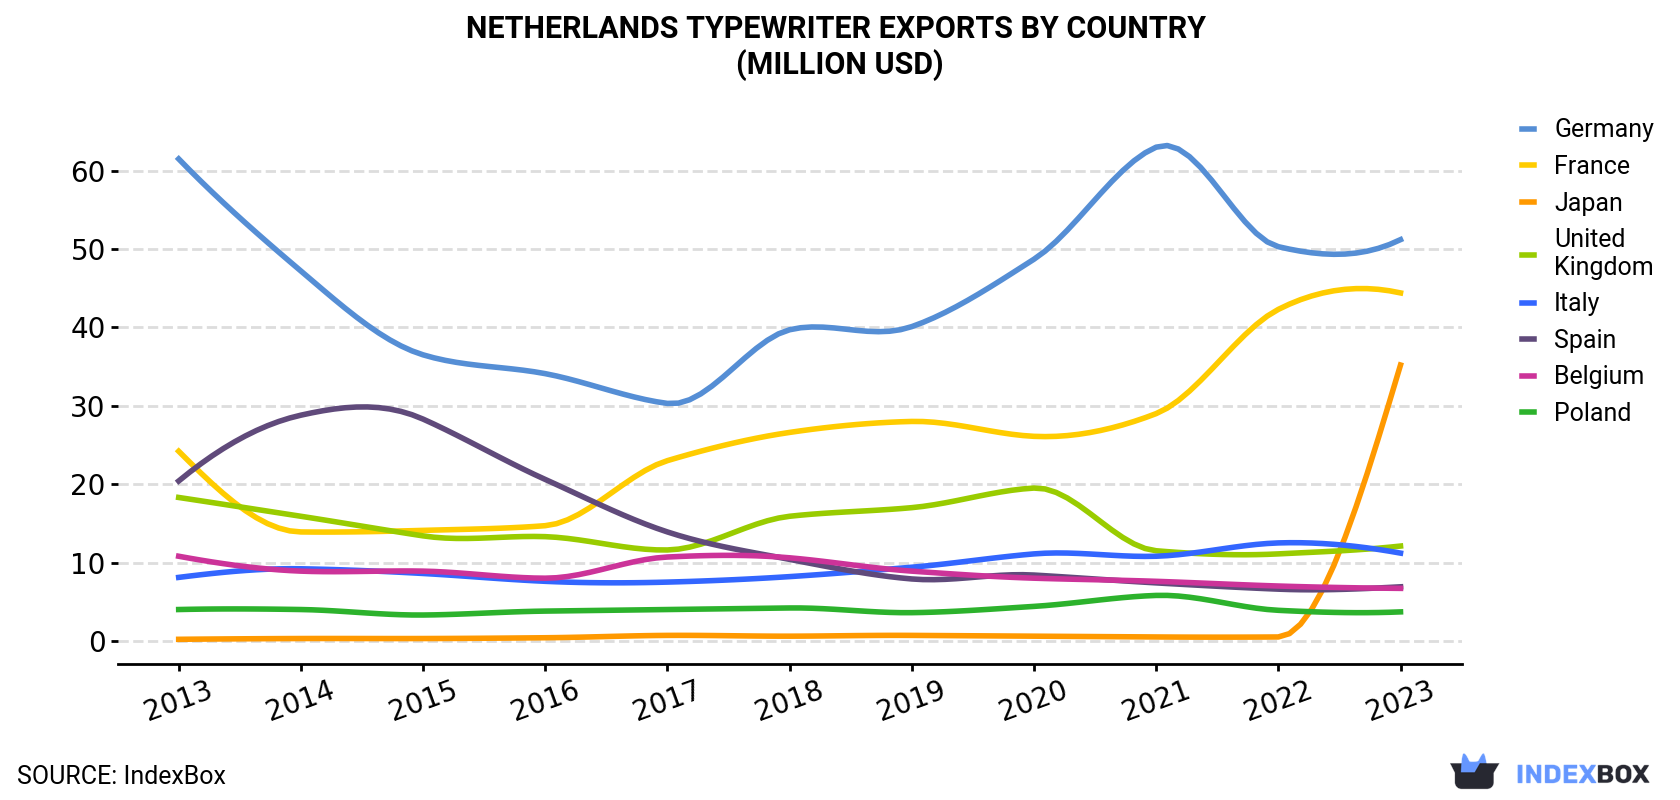 Netherlands Typewriter Exports By Country (Million USD)